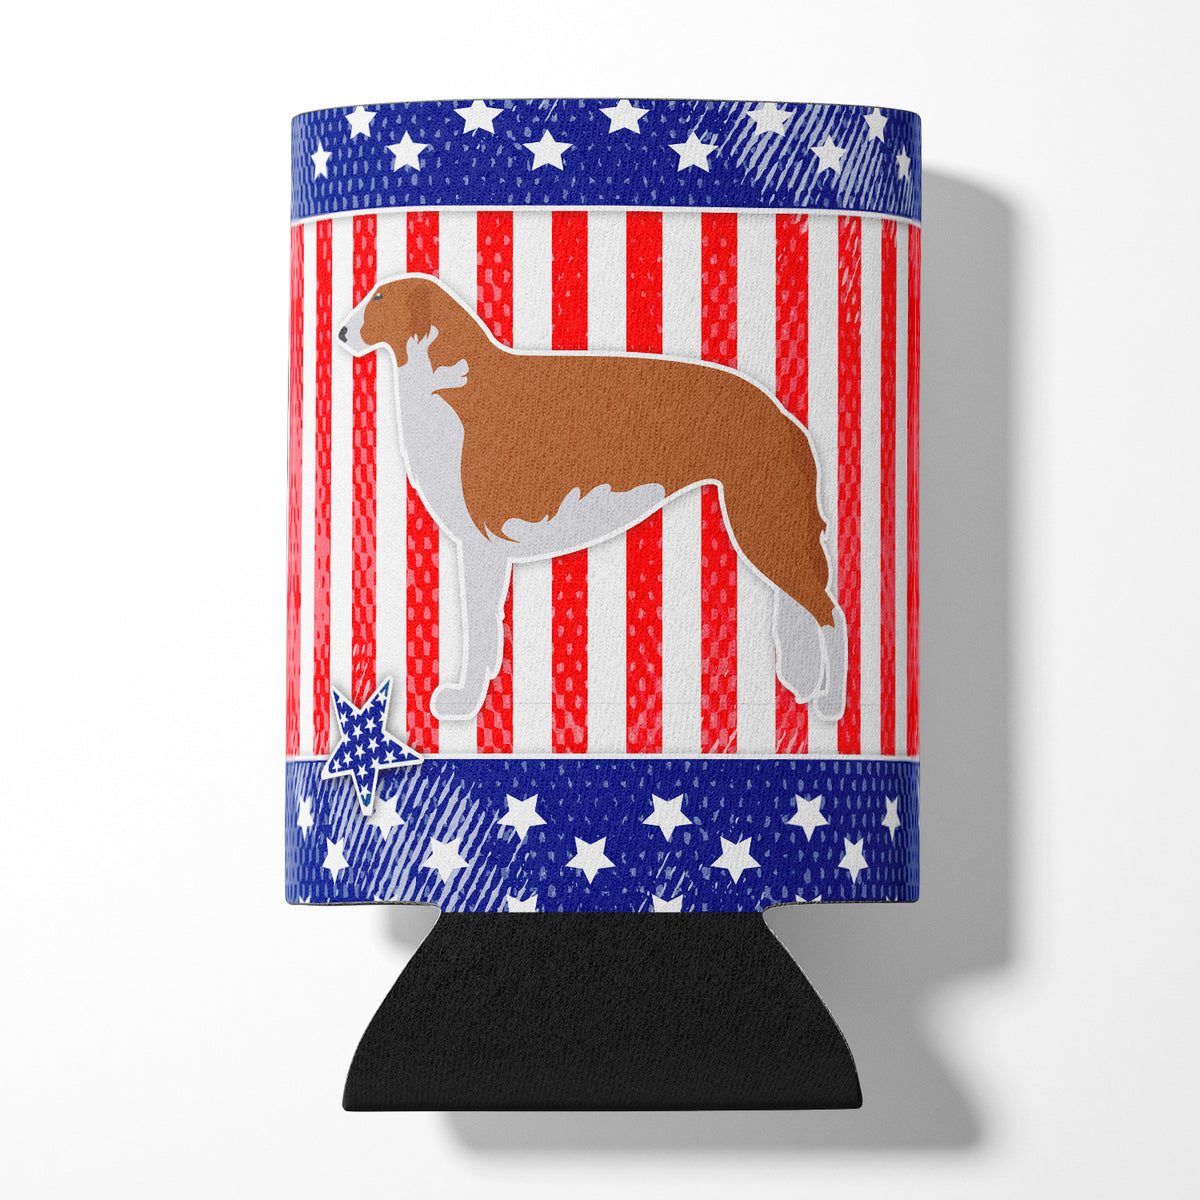 USA Patriotic Borzoi Russian Greyhound Can or Bottle Hugger BB3299CC  the-store.com.